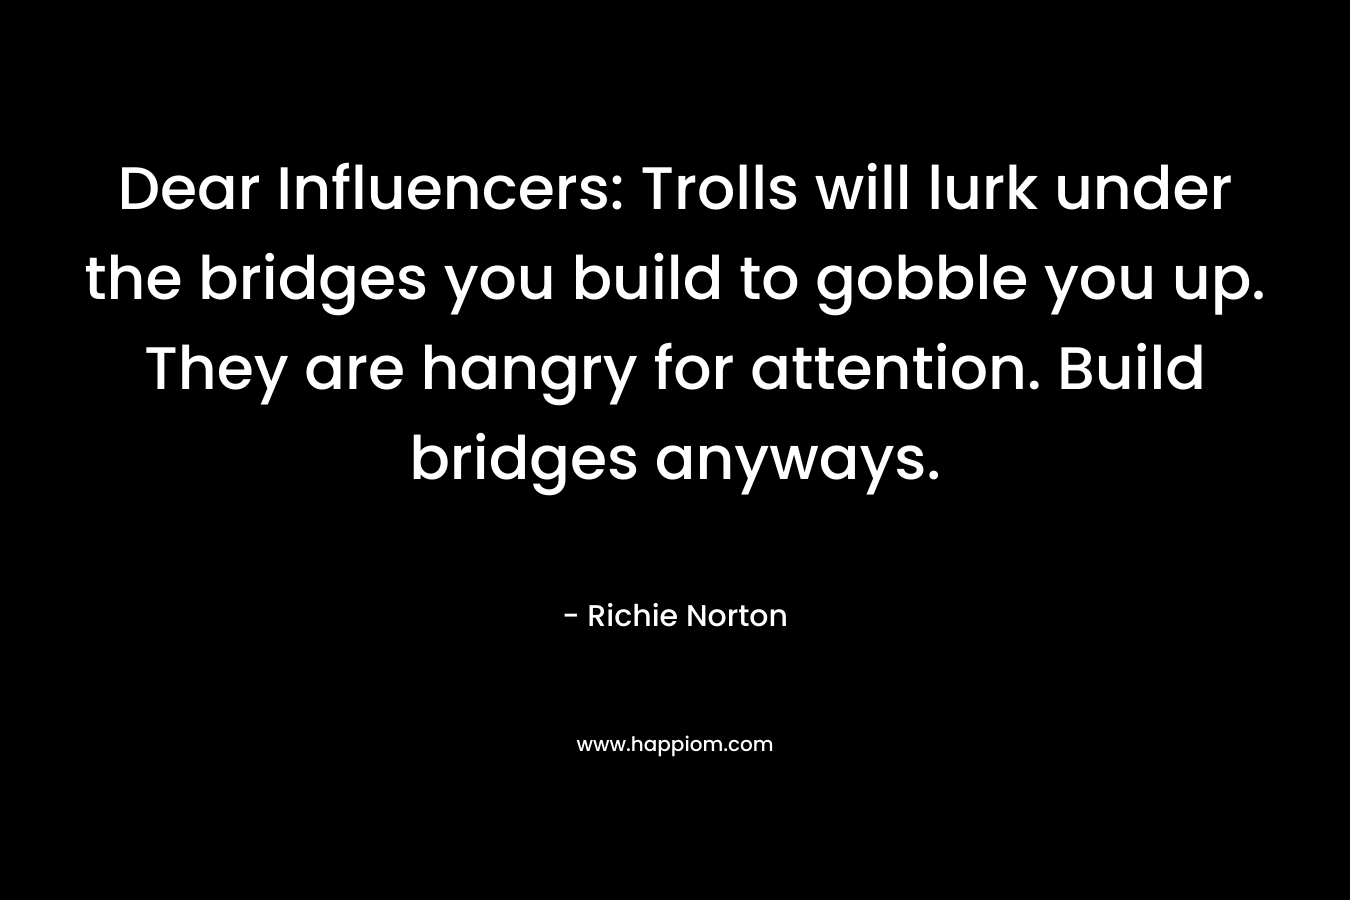 Dear Influencers: Trolls will lurk under the bridges you build to gobble you up. They are hangry for attention. Build bridges anyways.